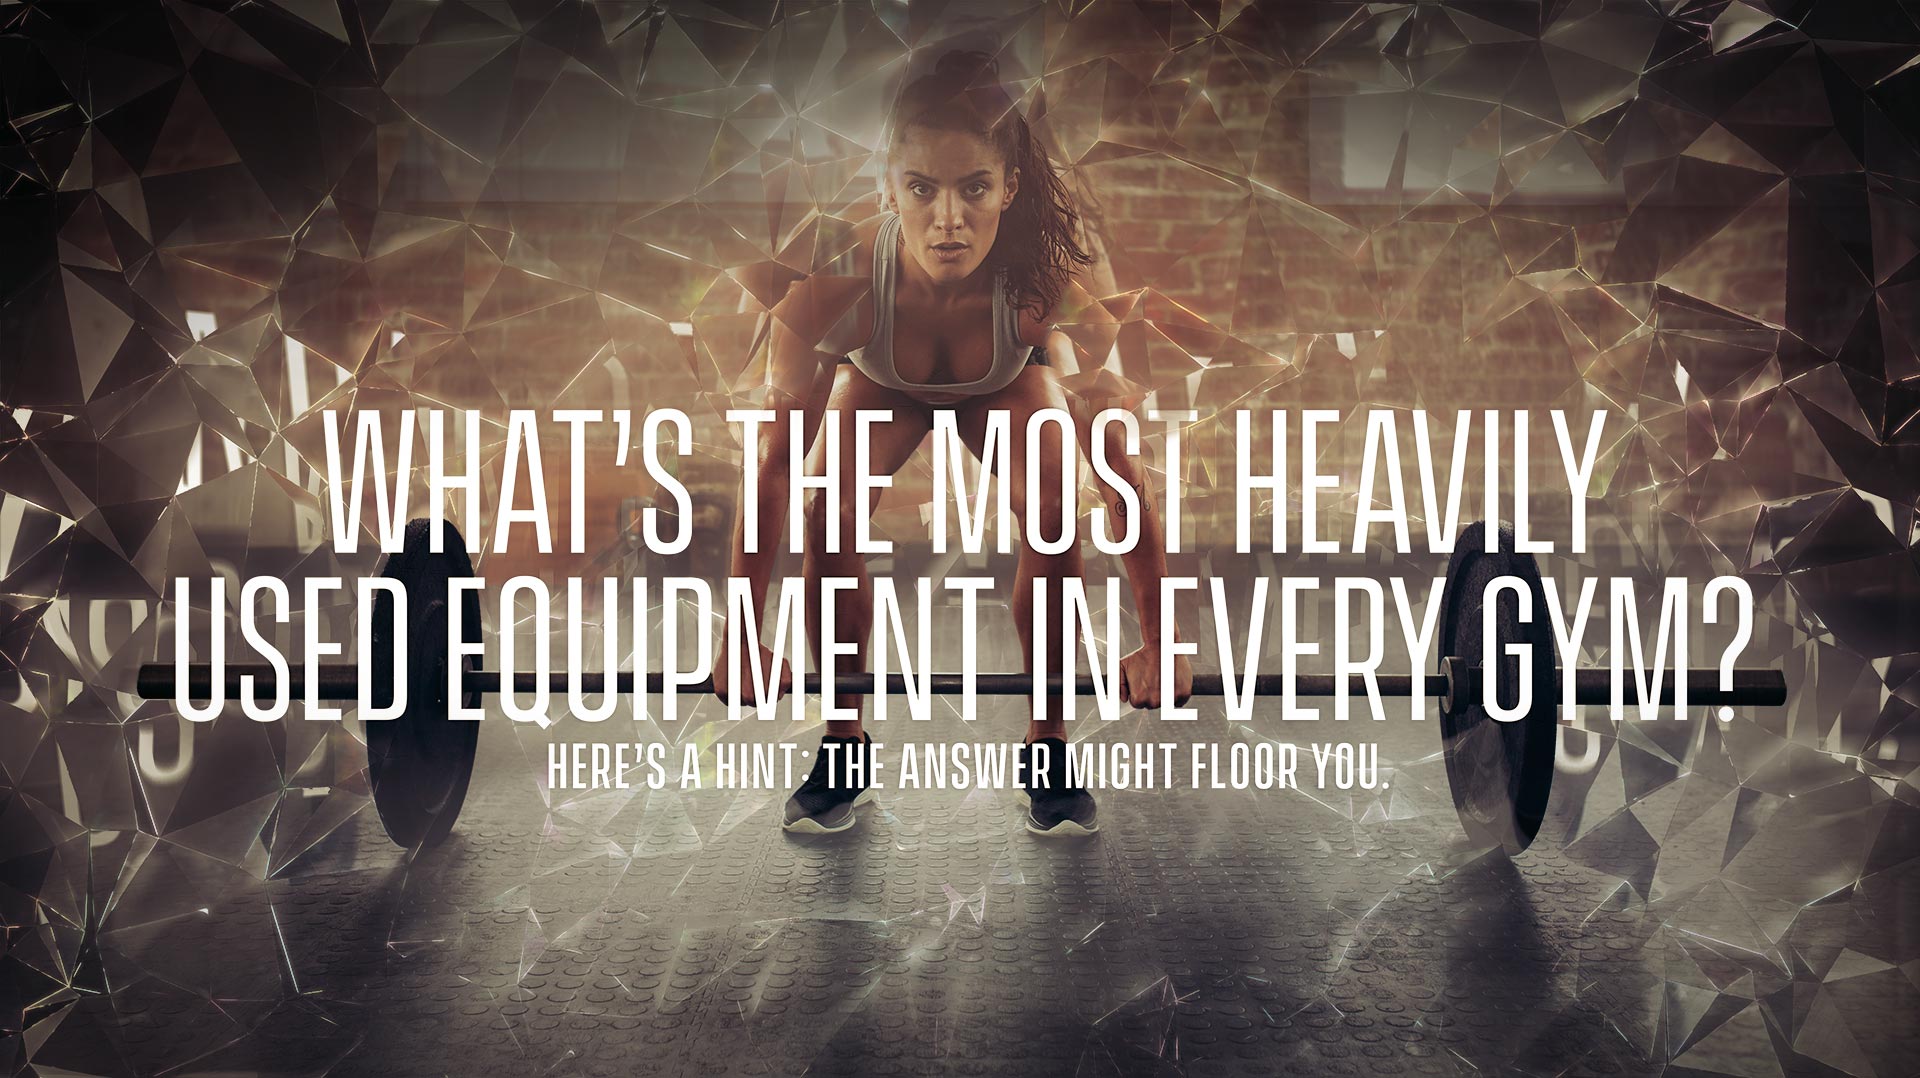 What's the most heavily used equipment in every gym? Here's a hint: the answer might floor you.